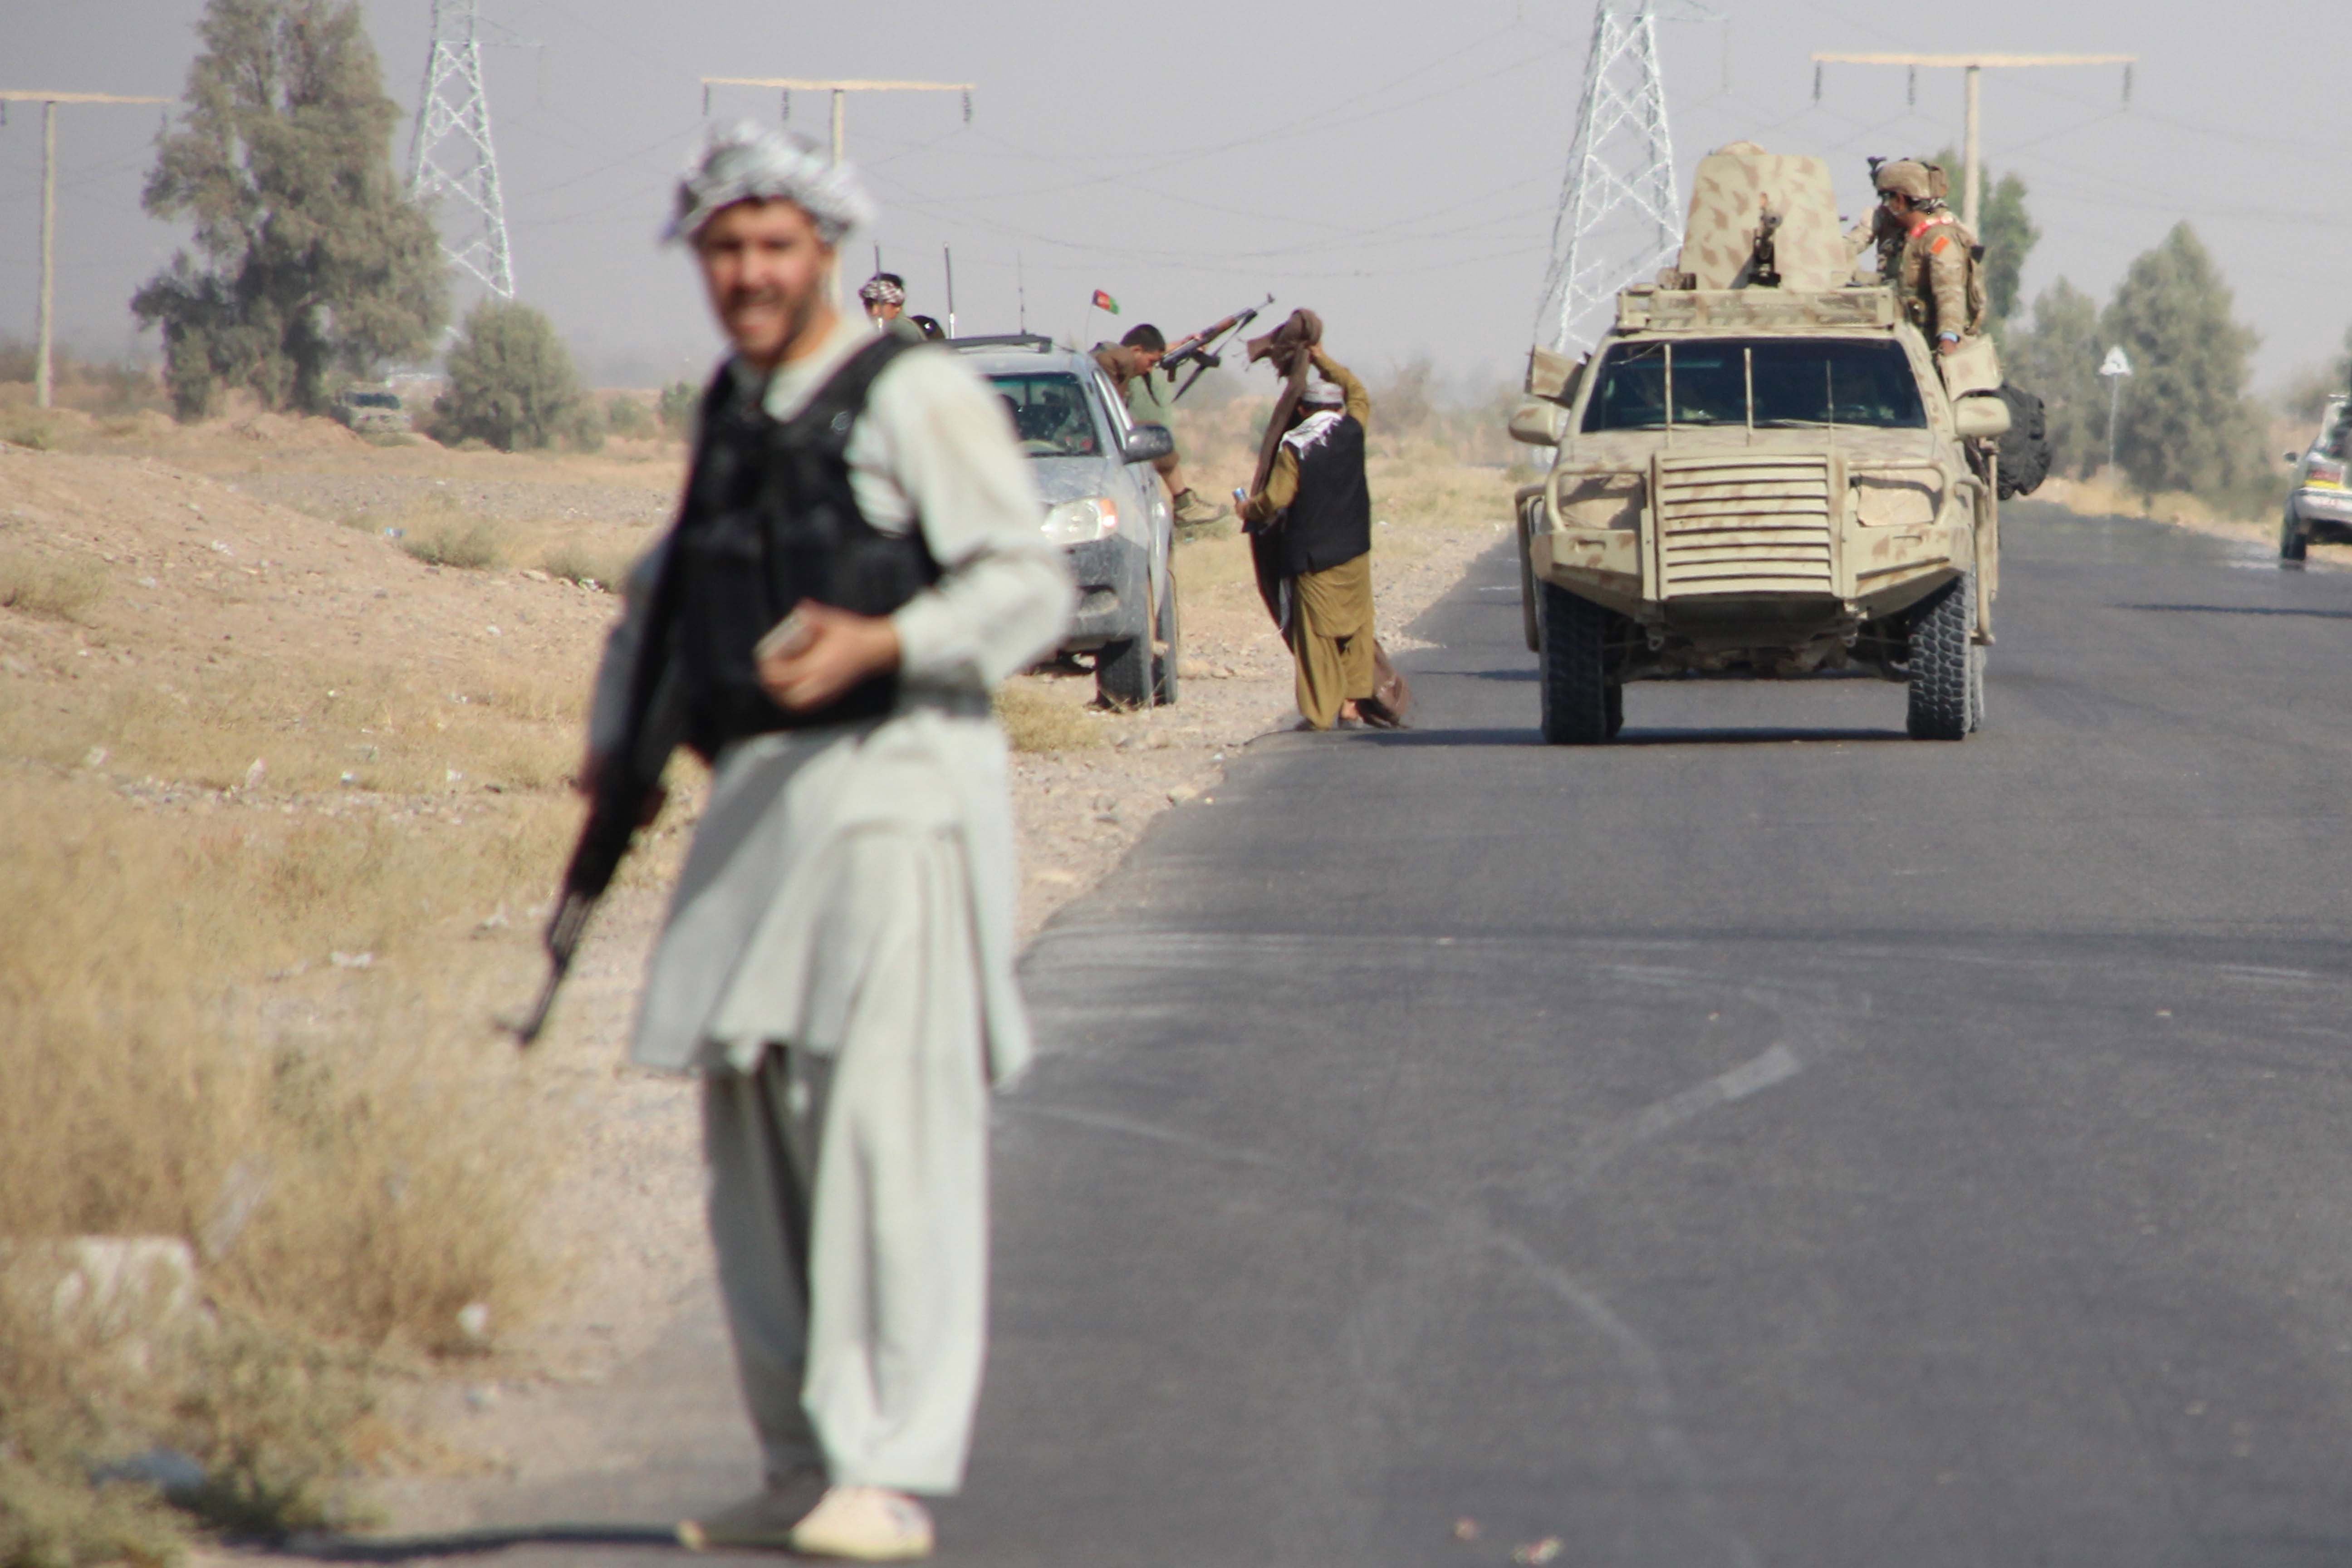 Afghan security officials and private militia patrol on Helmand-Kandahar highway